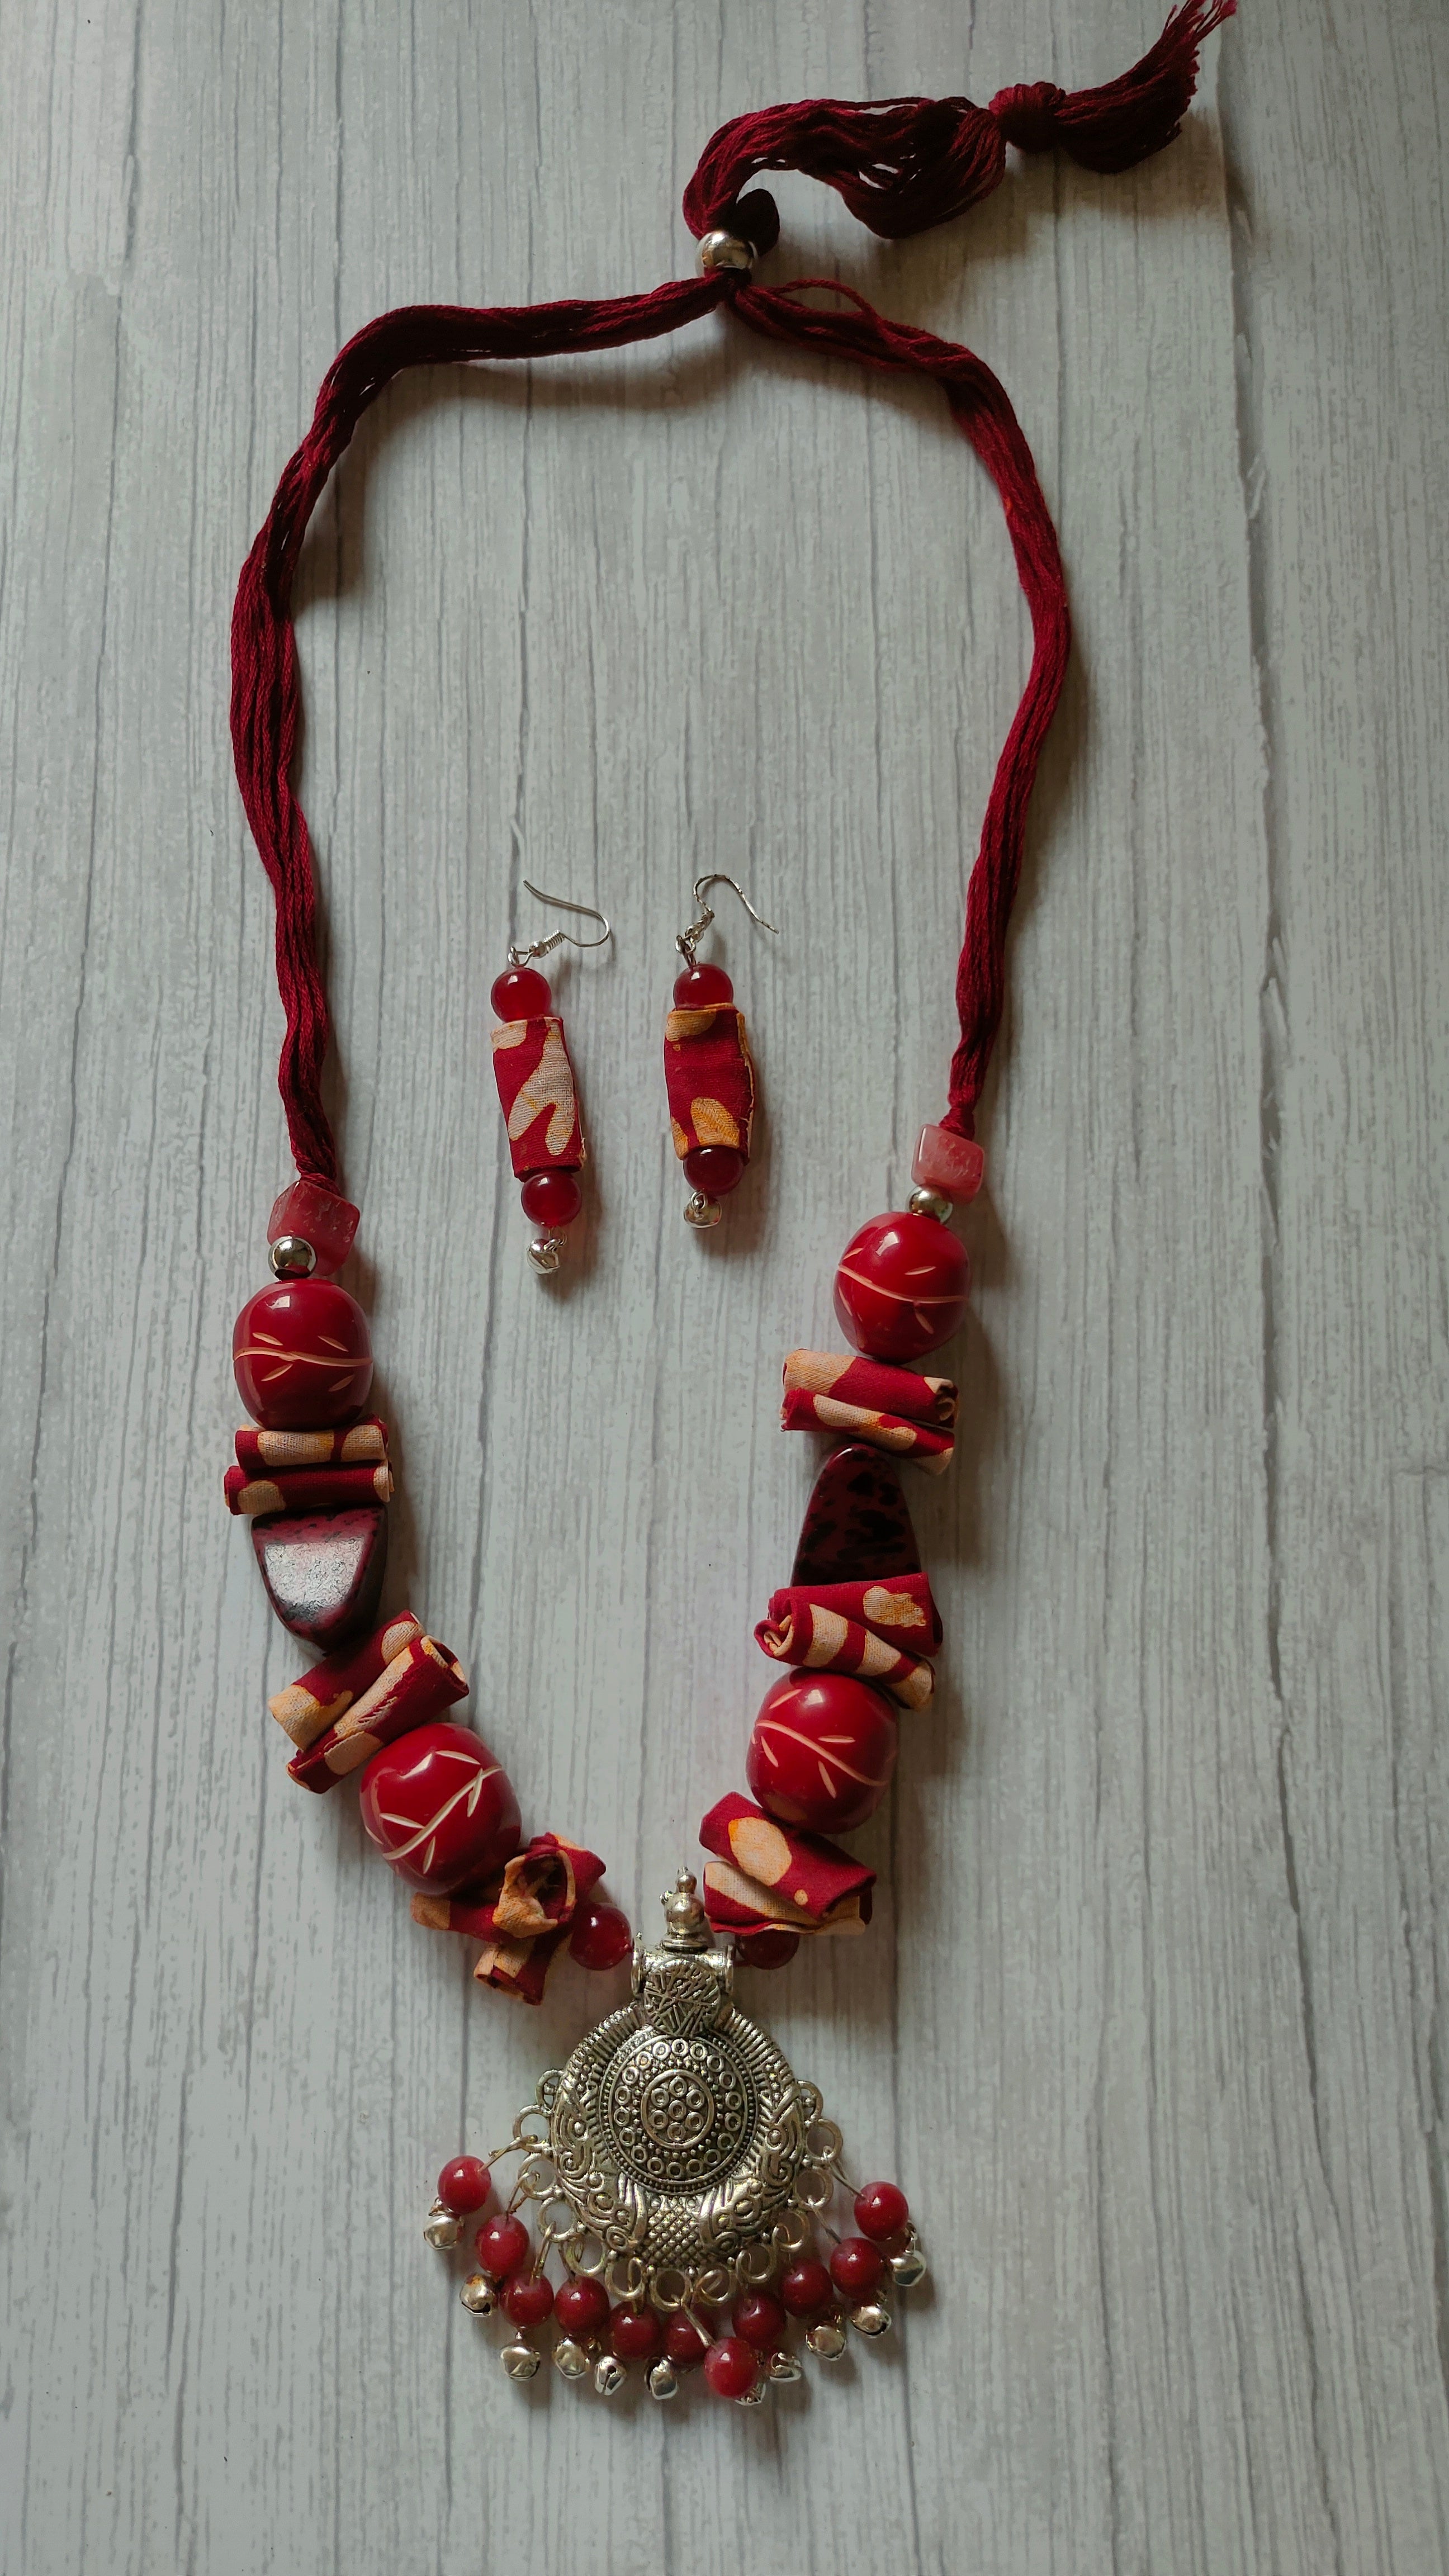 Vibrant Beads, Stones and Fabric Thread Closure Necklace Set